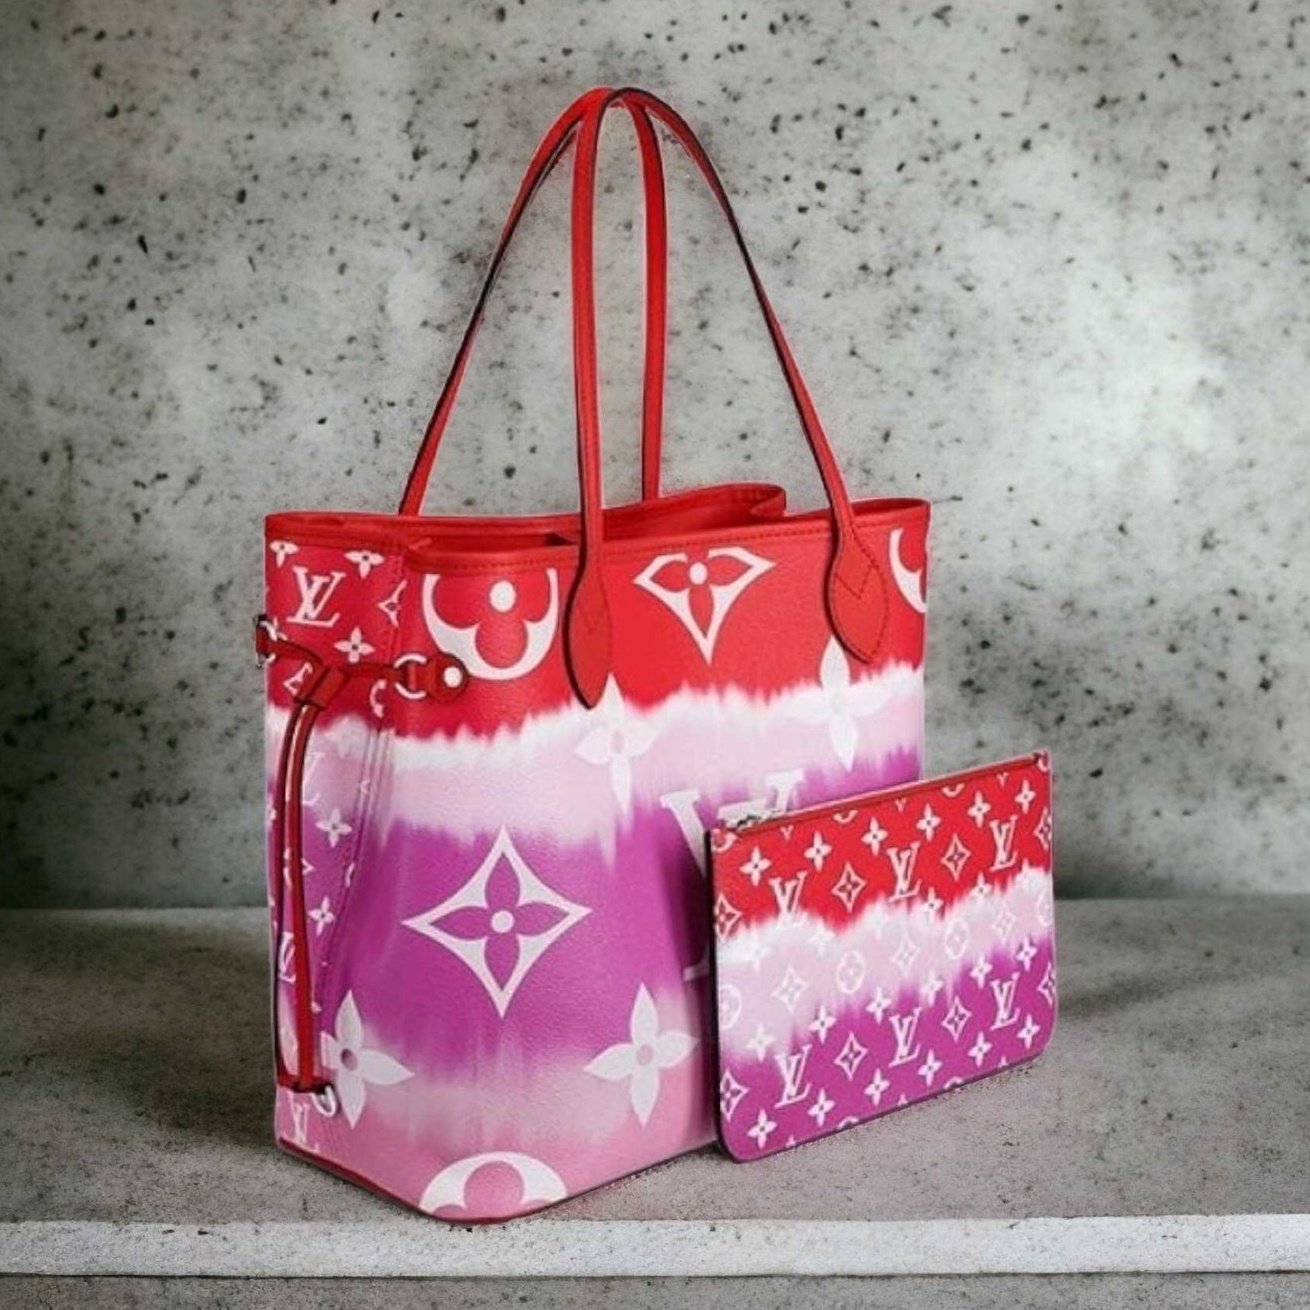 Tie-Dye Inspired Tote Bag - Versatile & Fashionable - High-Quality Canvas Handbag - Escale Collection Inspired